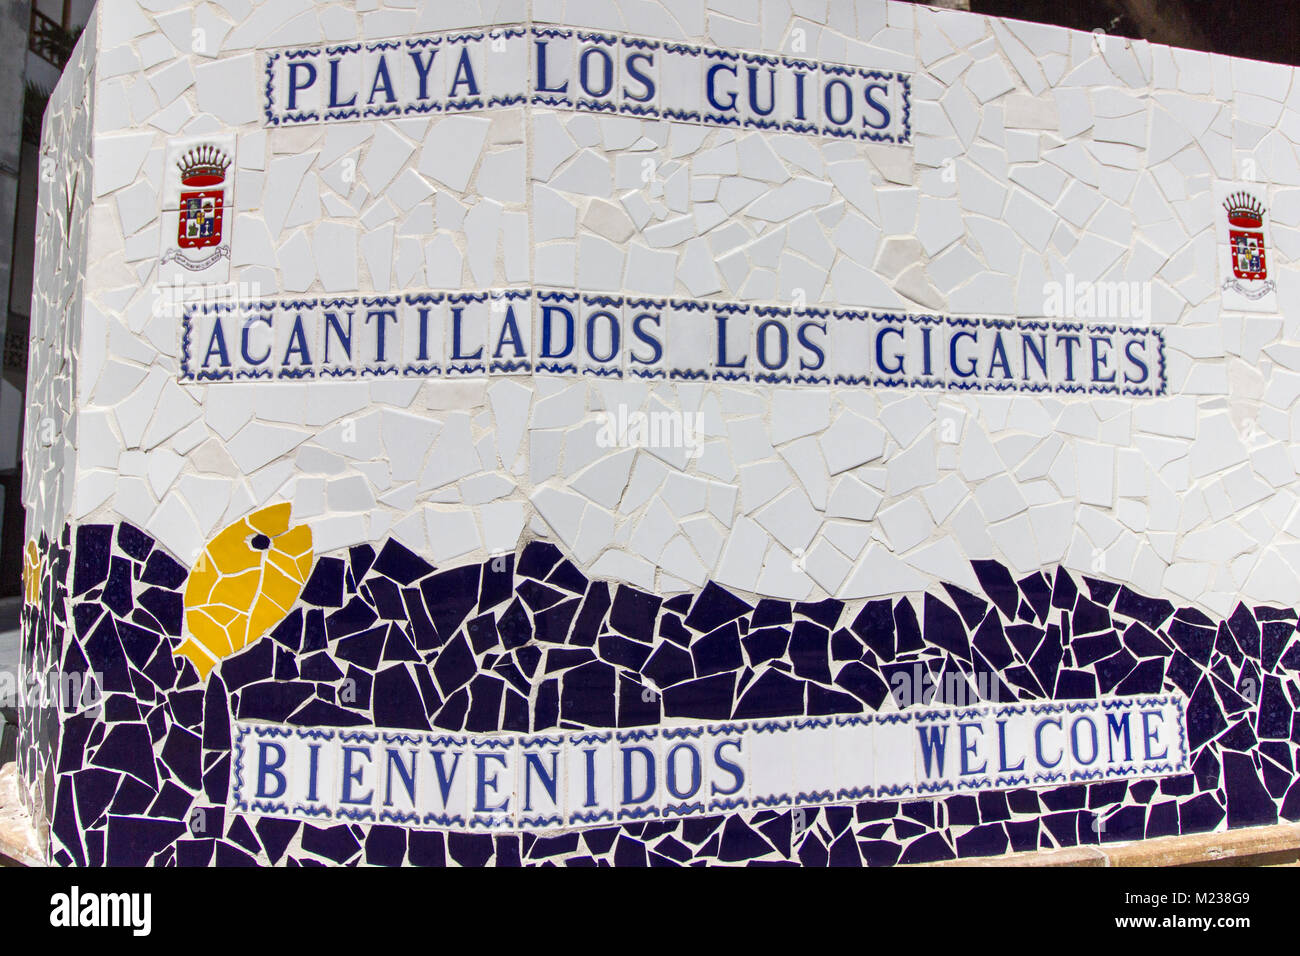 Tiled mosaic whic creates a welcome sign for Playa Los Guios and Acantilados Los Gigantes (Cliffs of Los Gigantes) Stock Photo